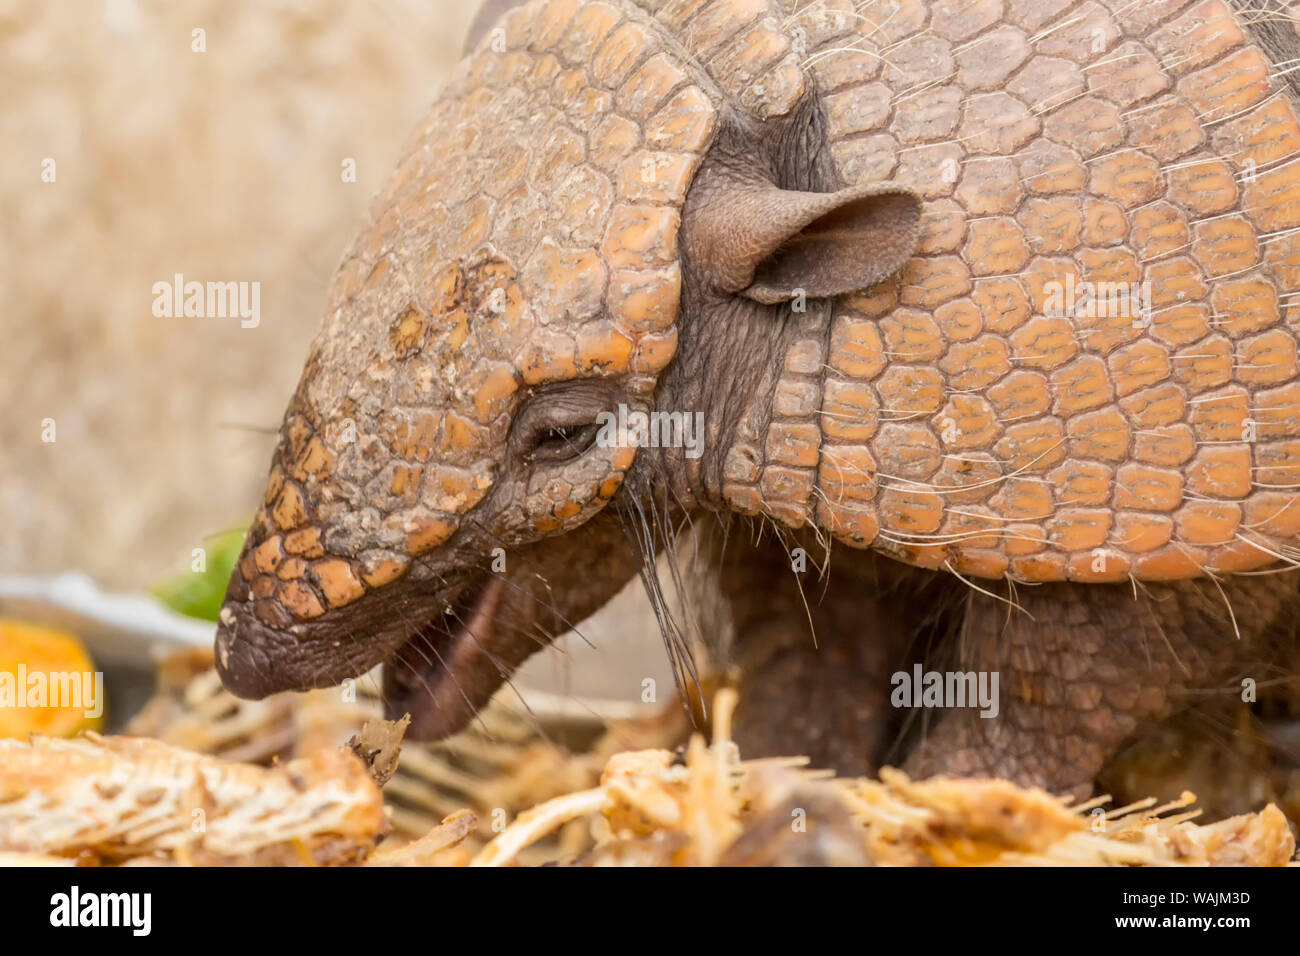 Pantanal, Mato Grosso, Brazil. Seven-banded armadillo eating table scraps set out for it. Stock Photo